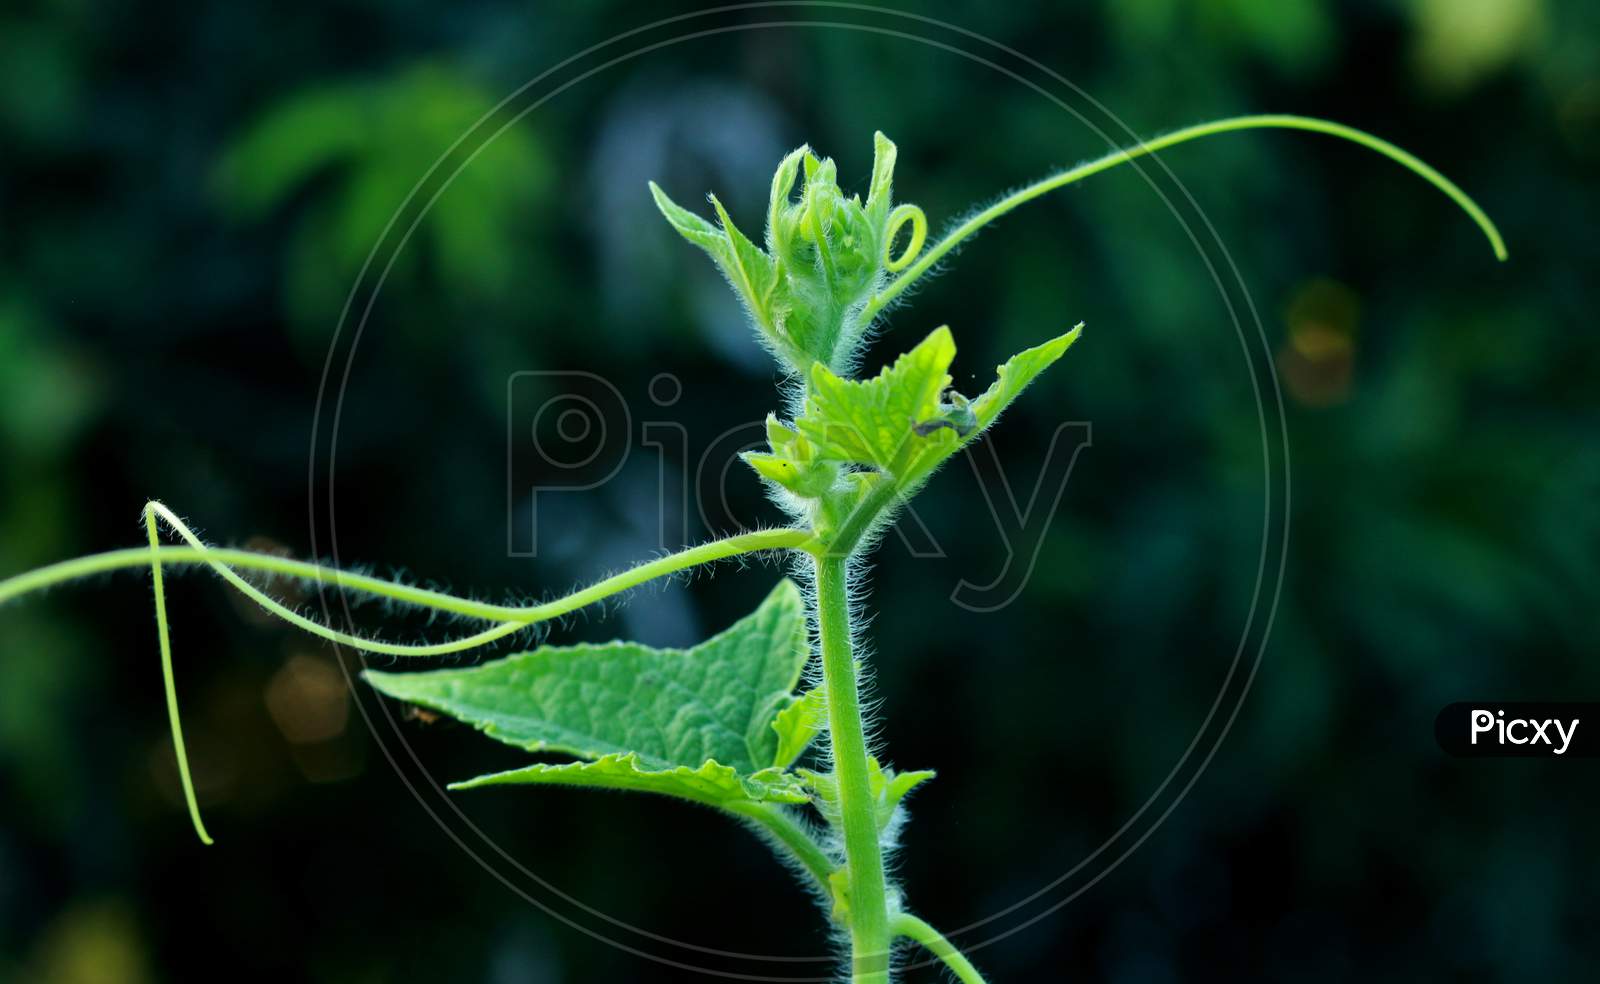 Blur ground background with young green plant leaves shallow depth of field under natural sunlight and dark environment in garden outdoor for peaceful mood backdrop or background